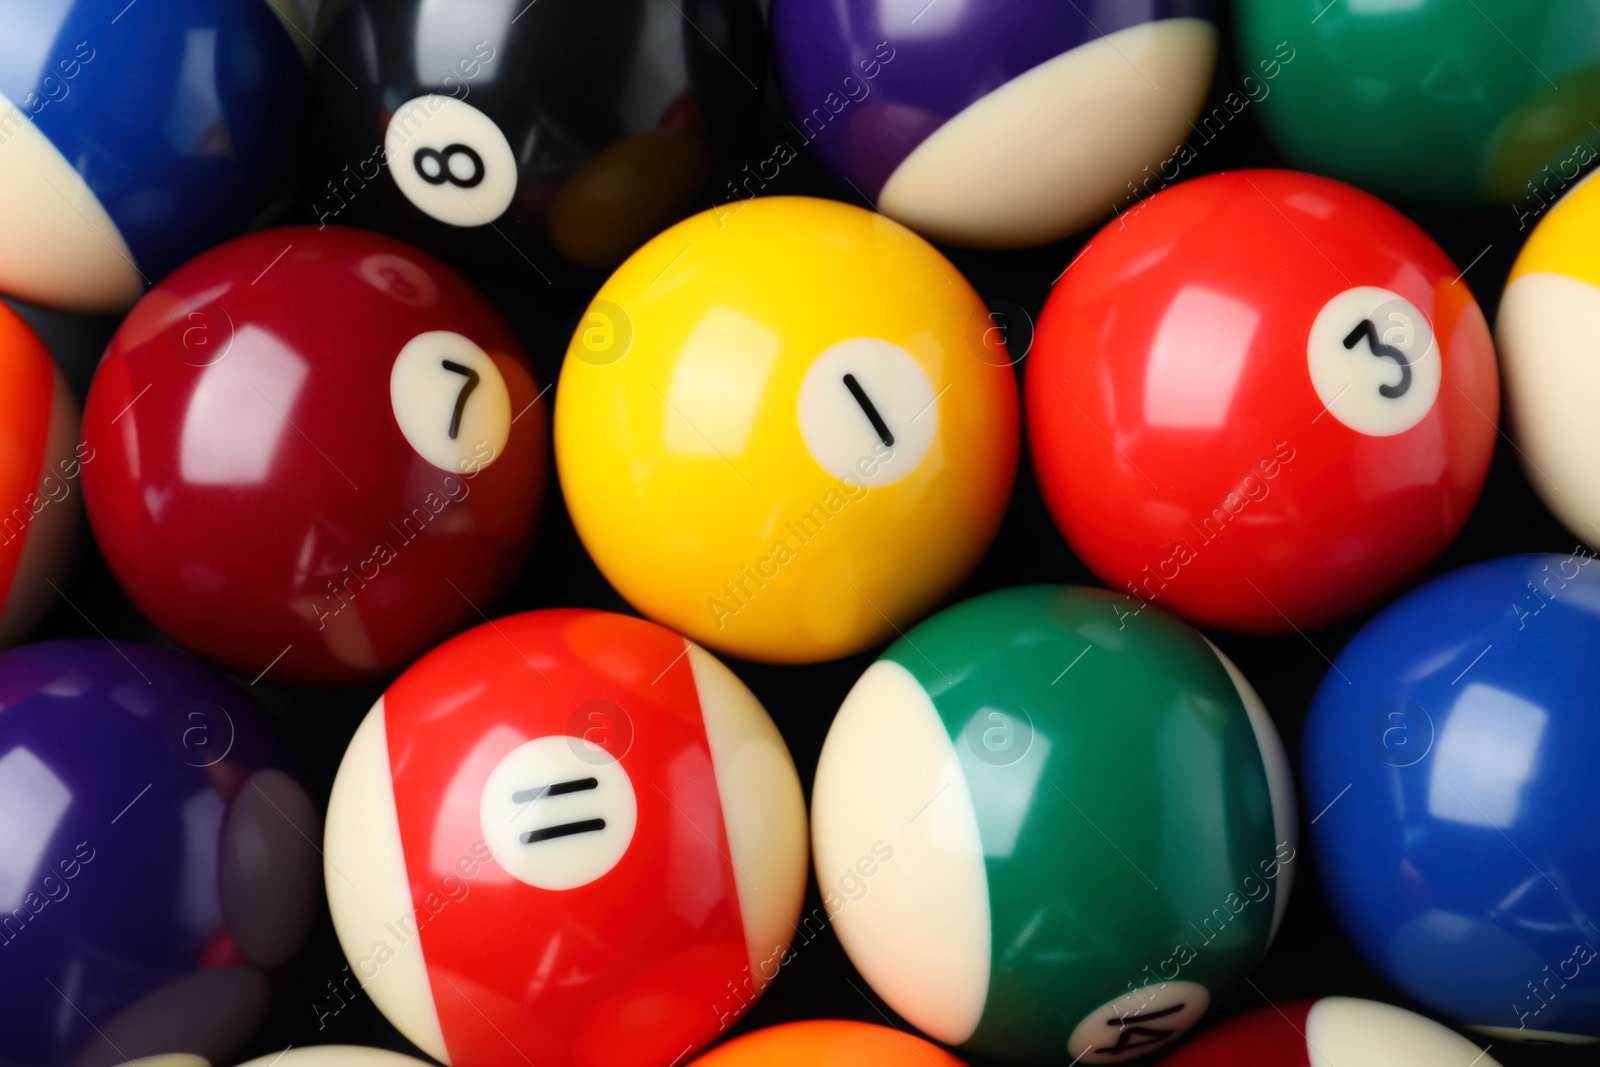 Photo of Many colorful billiard balls as background, top view